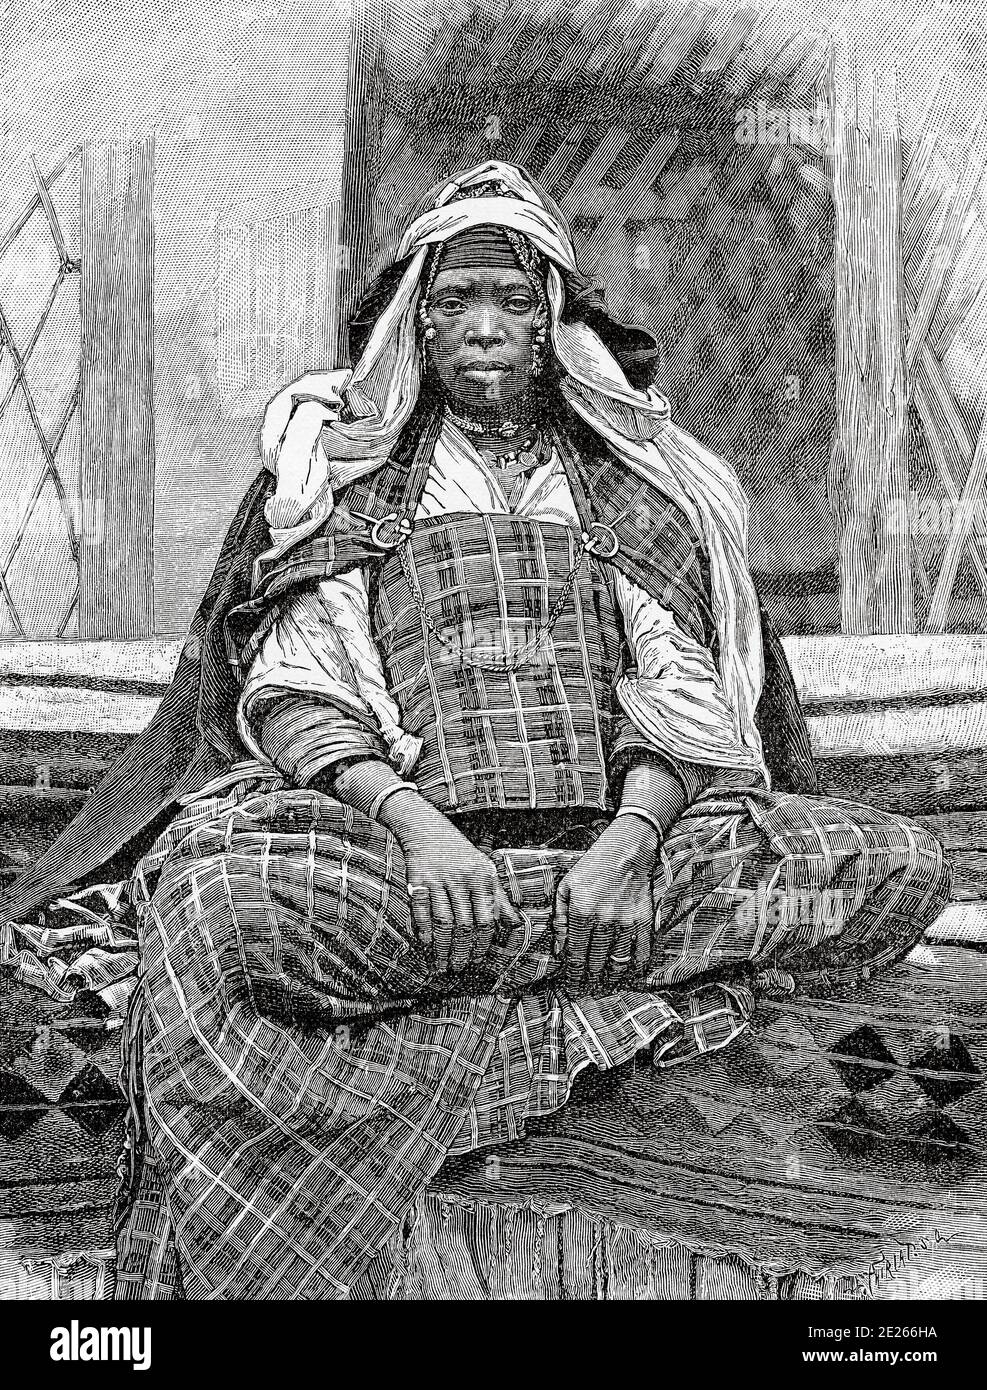 Woman from Biskra. Algeria. North Africa. Old engraving illustration from the book Nueva Geografia Universal by Eliseo Reclus 1889 Stock Photo